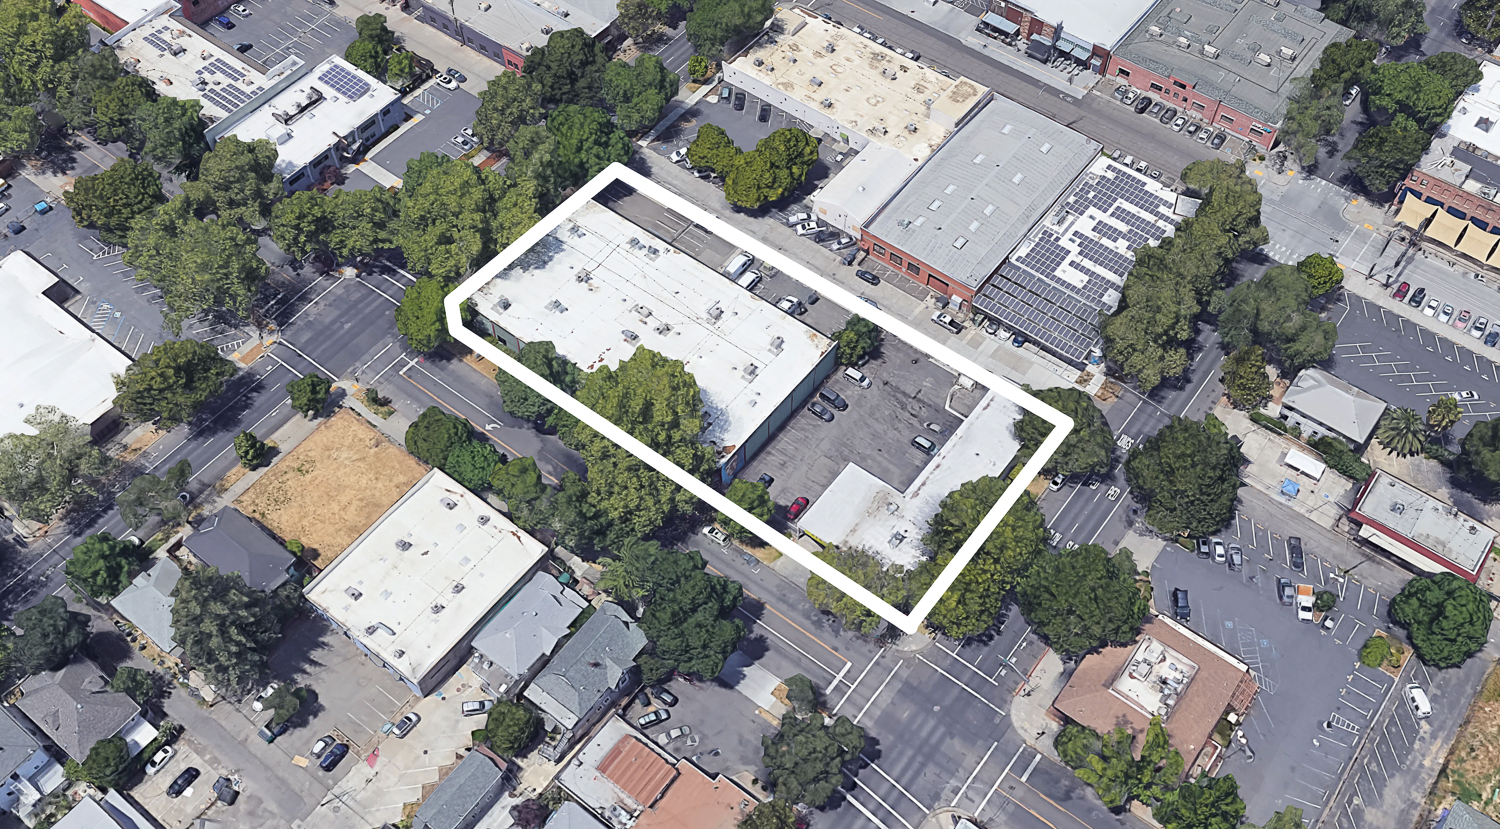 905 & 925 S Street outlined approximately by YIMBY, image via Google Satellite